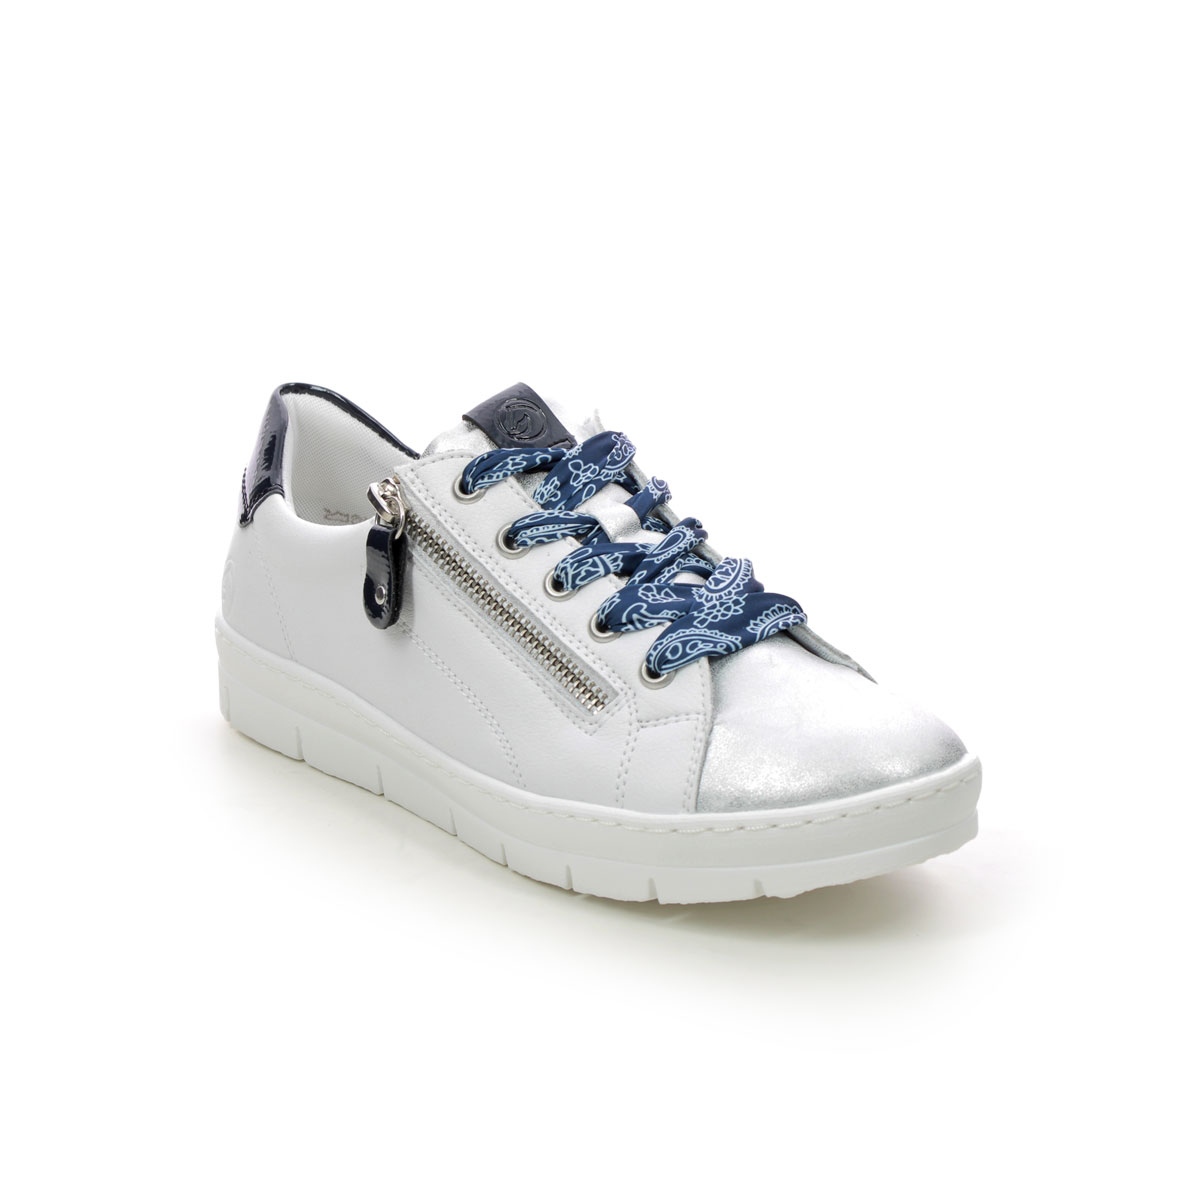 Remonte Ravenna 11 White Navy  Womens Trainers D5825-80 In Size 38 In Plain White Navy